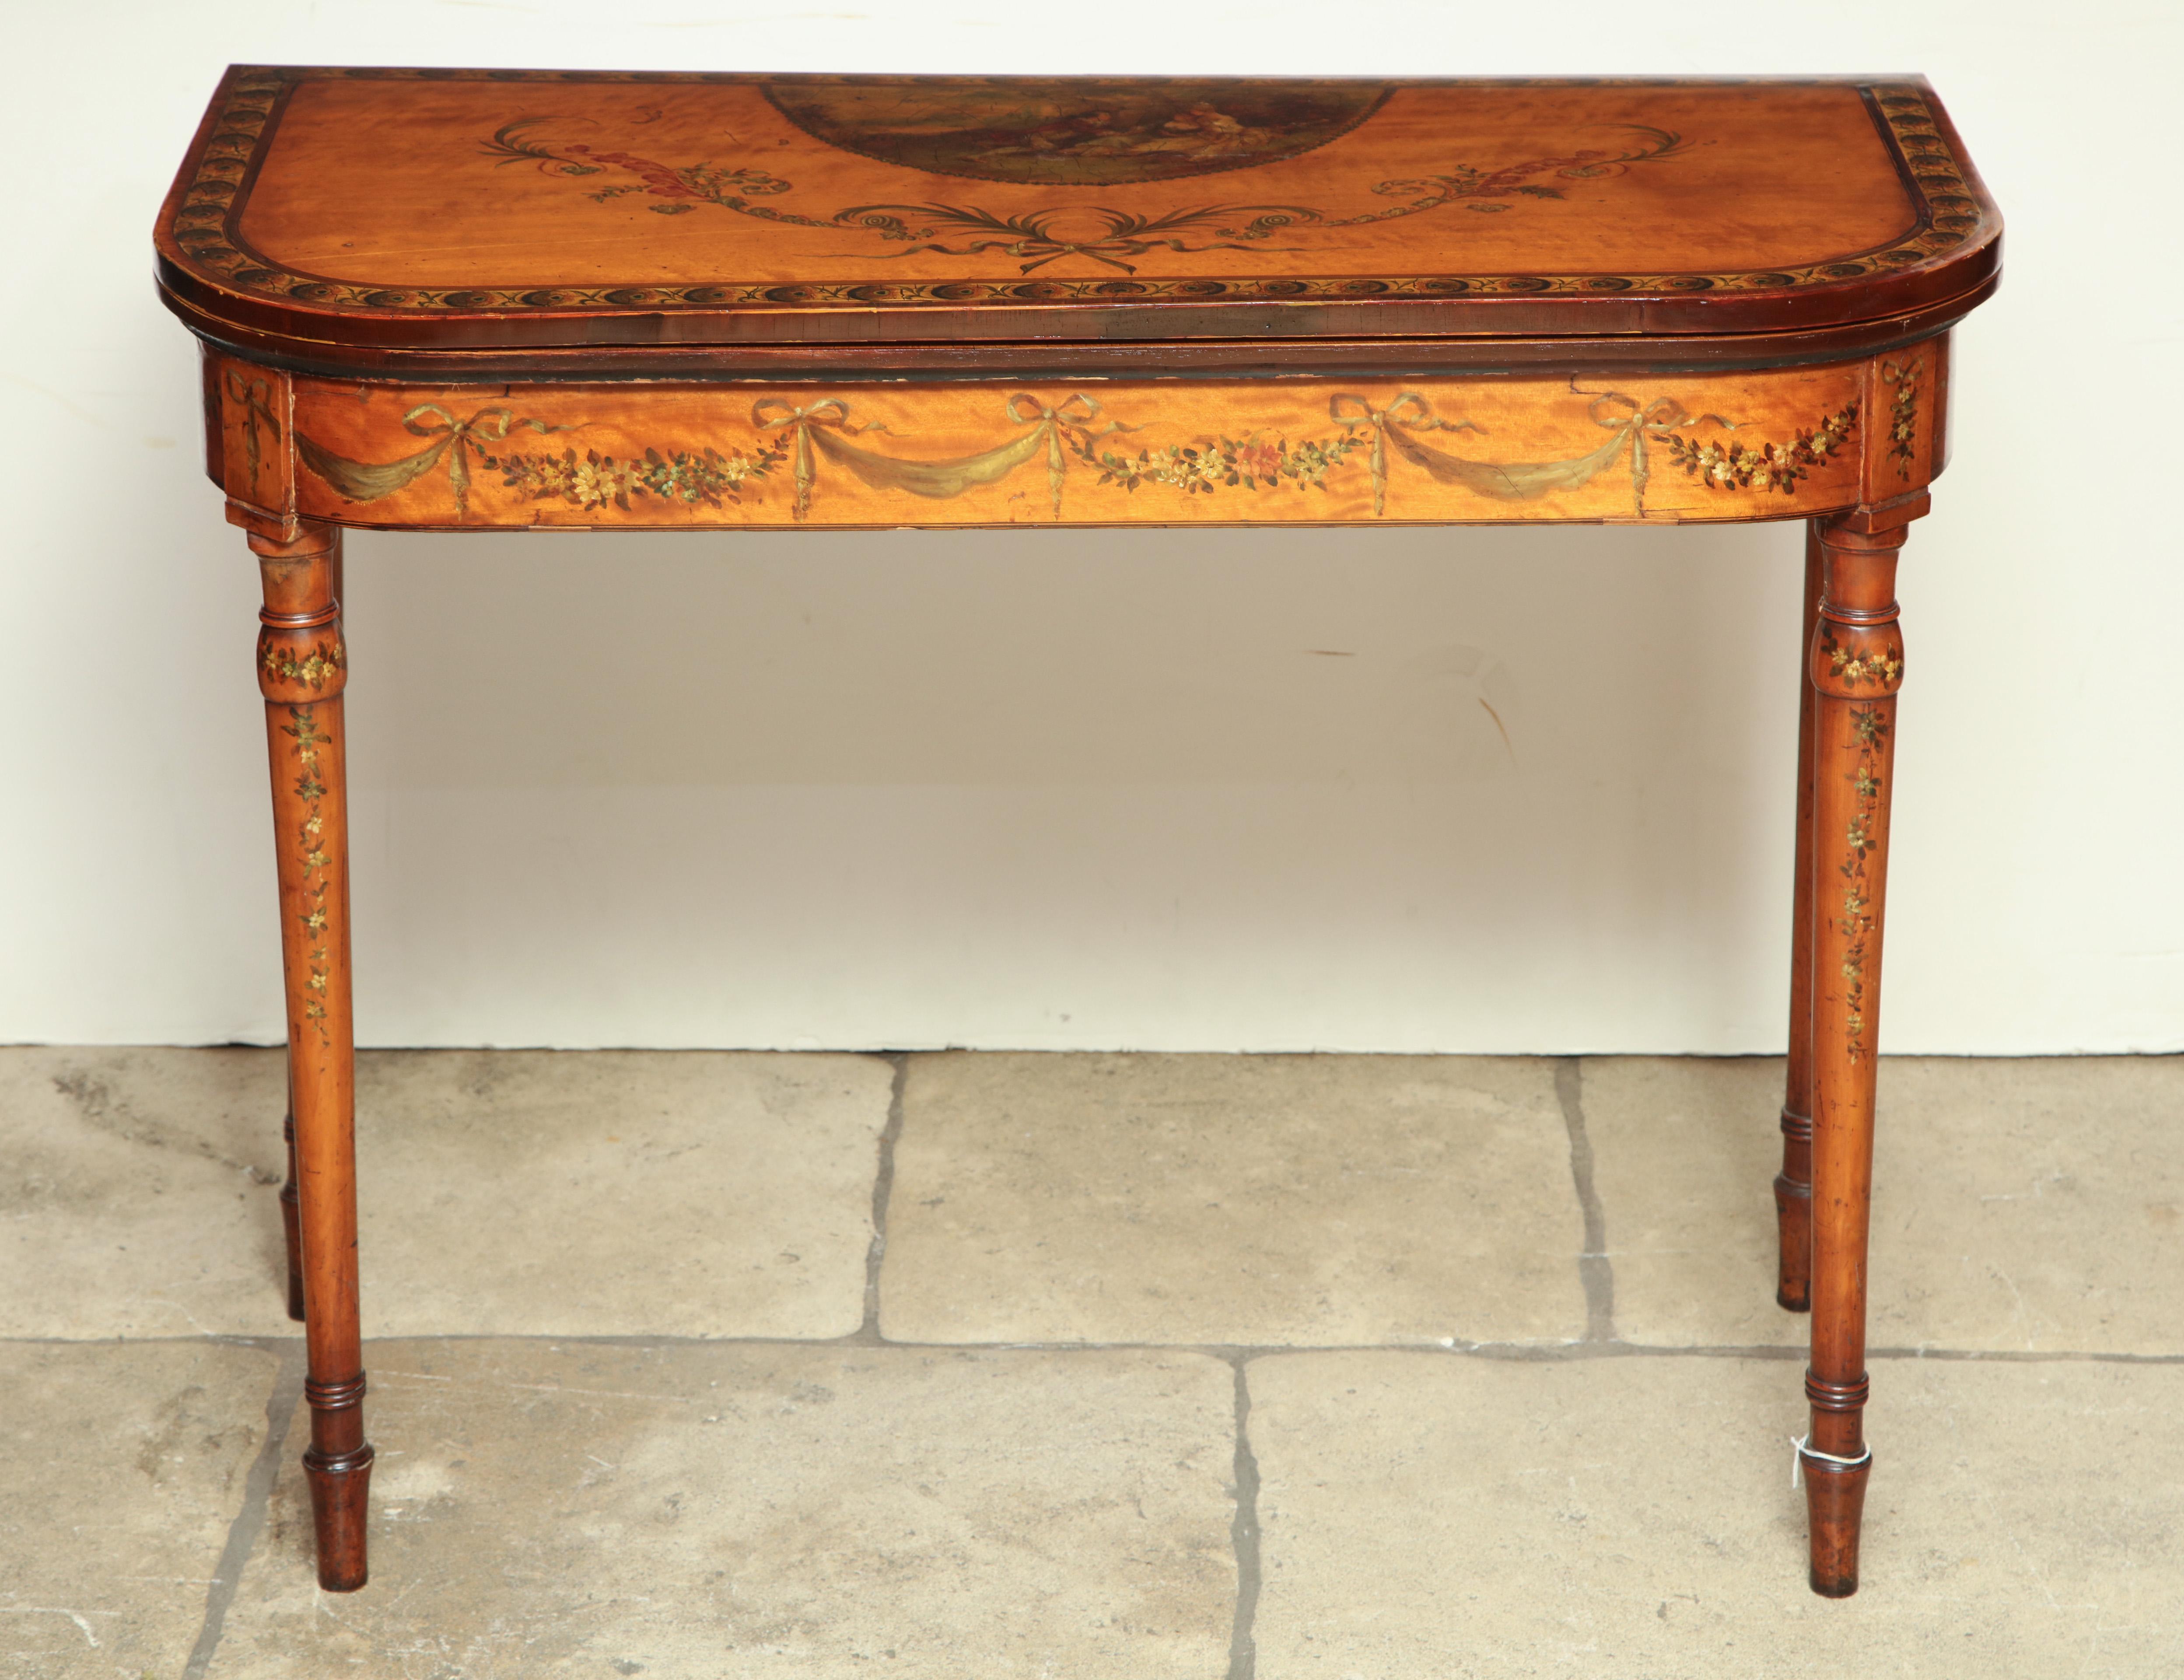 A fine English Sheraton satinwood crossbanded game table with hand painted neoclassic decorations on turned and tapaered legs.